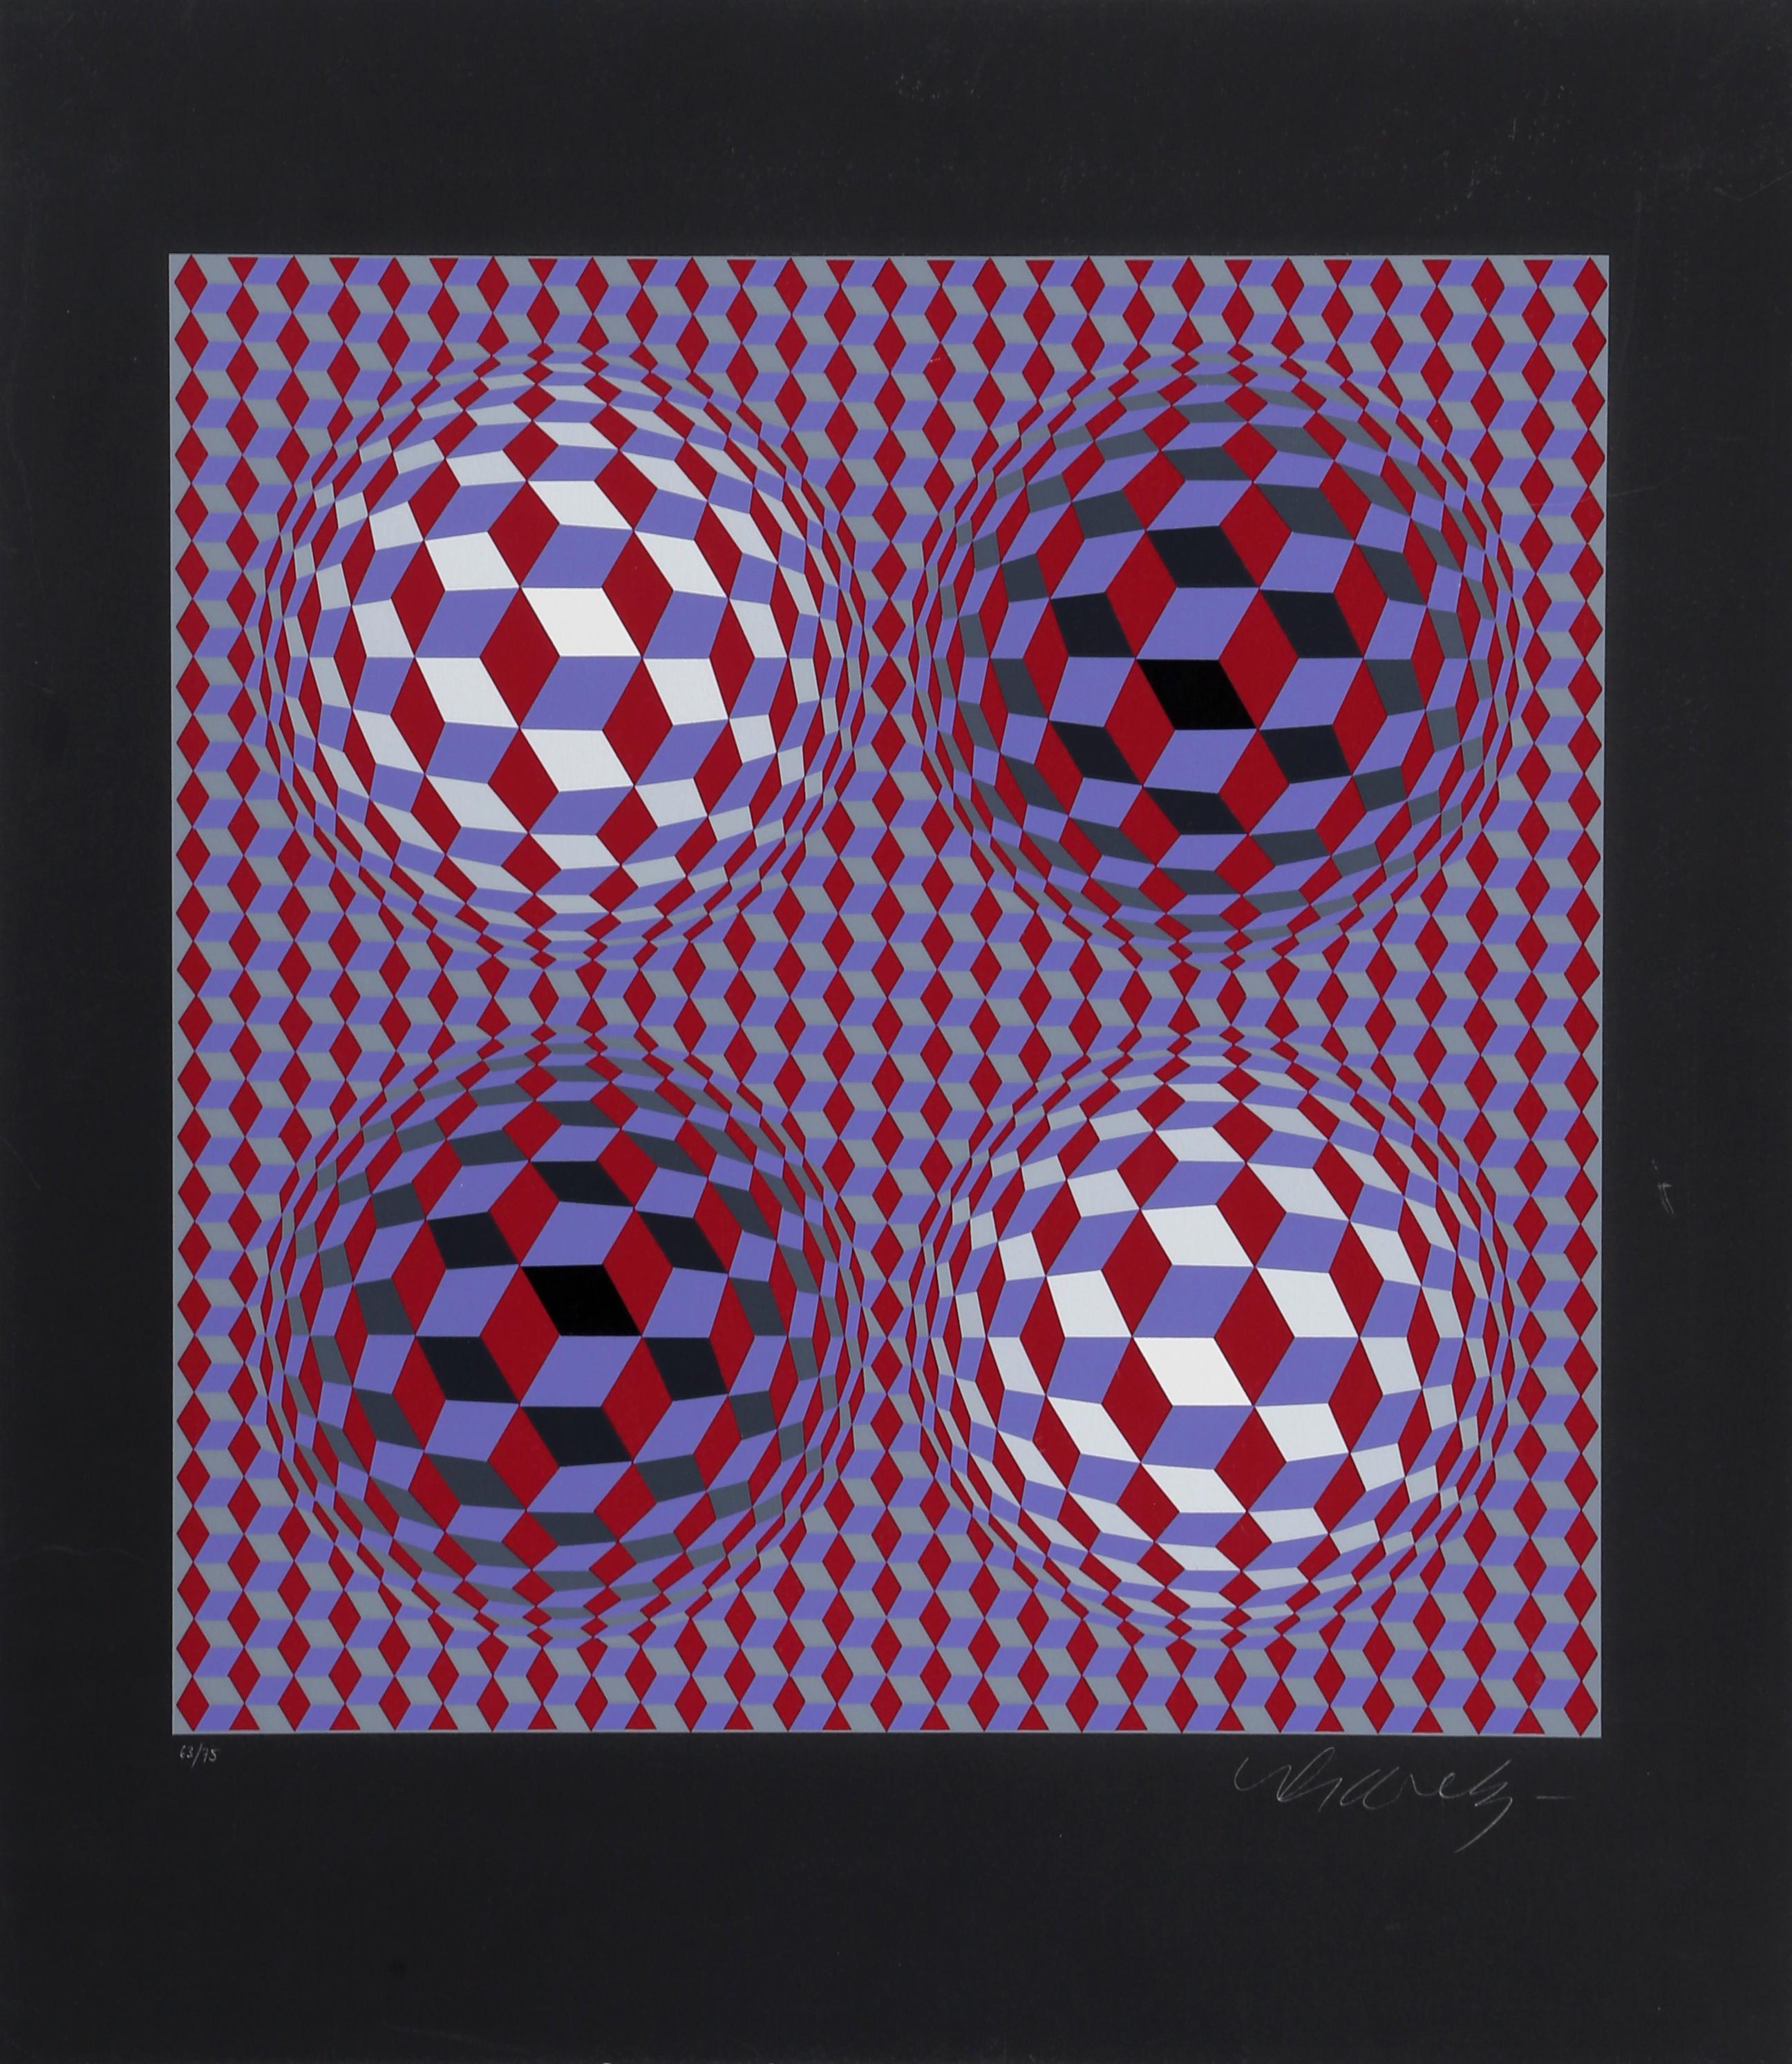 Deimos Black by Victor Vasarely, Hungarian (1908–1997)
Date: 1981
Screenprint, signed and numbered in pencil
Edition of 63/75
Image Size: 12.25 x 11.75 inches
Size: 17.25 x 15 in. (43.82 x 38.1 cm)